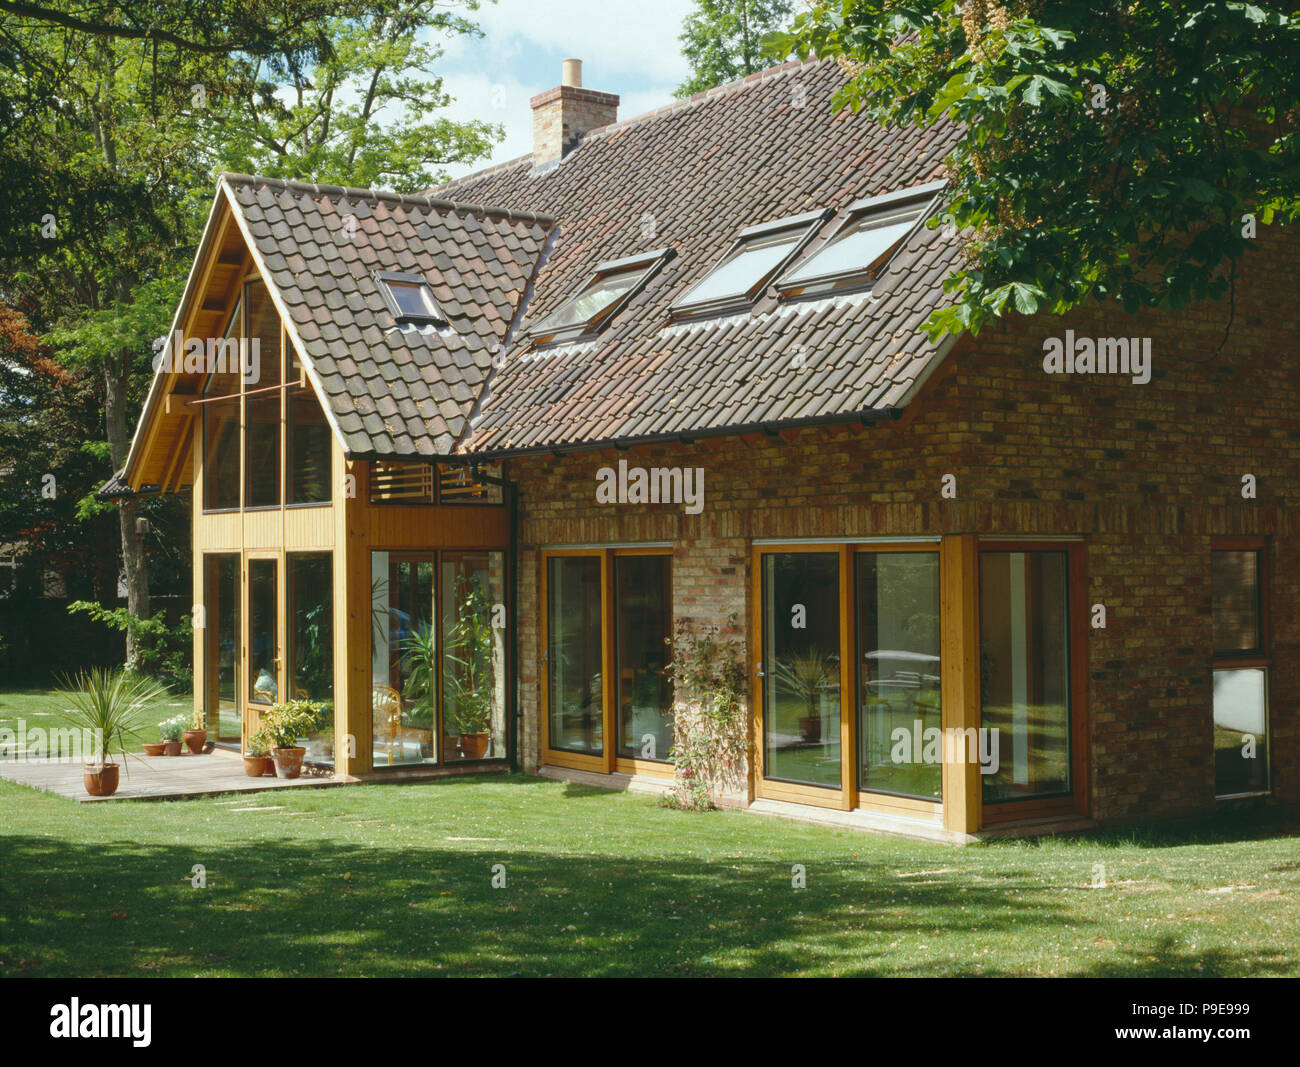 velux windows and sliding glass doors on modern country house with reclaimed pantiles Stock Photo